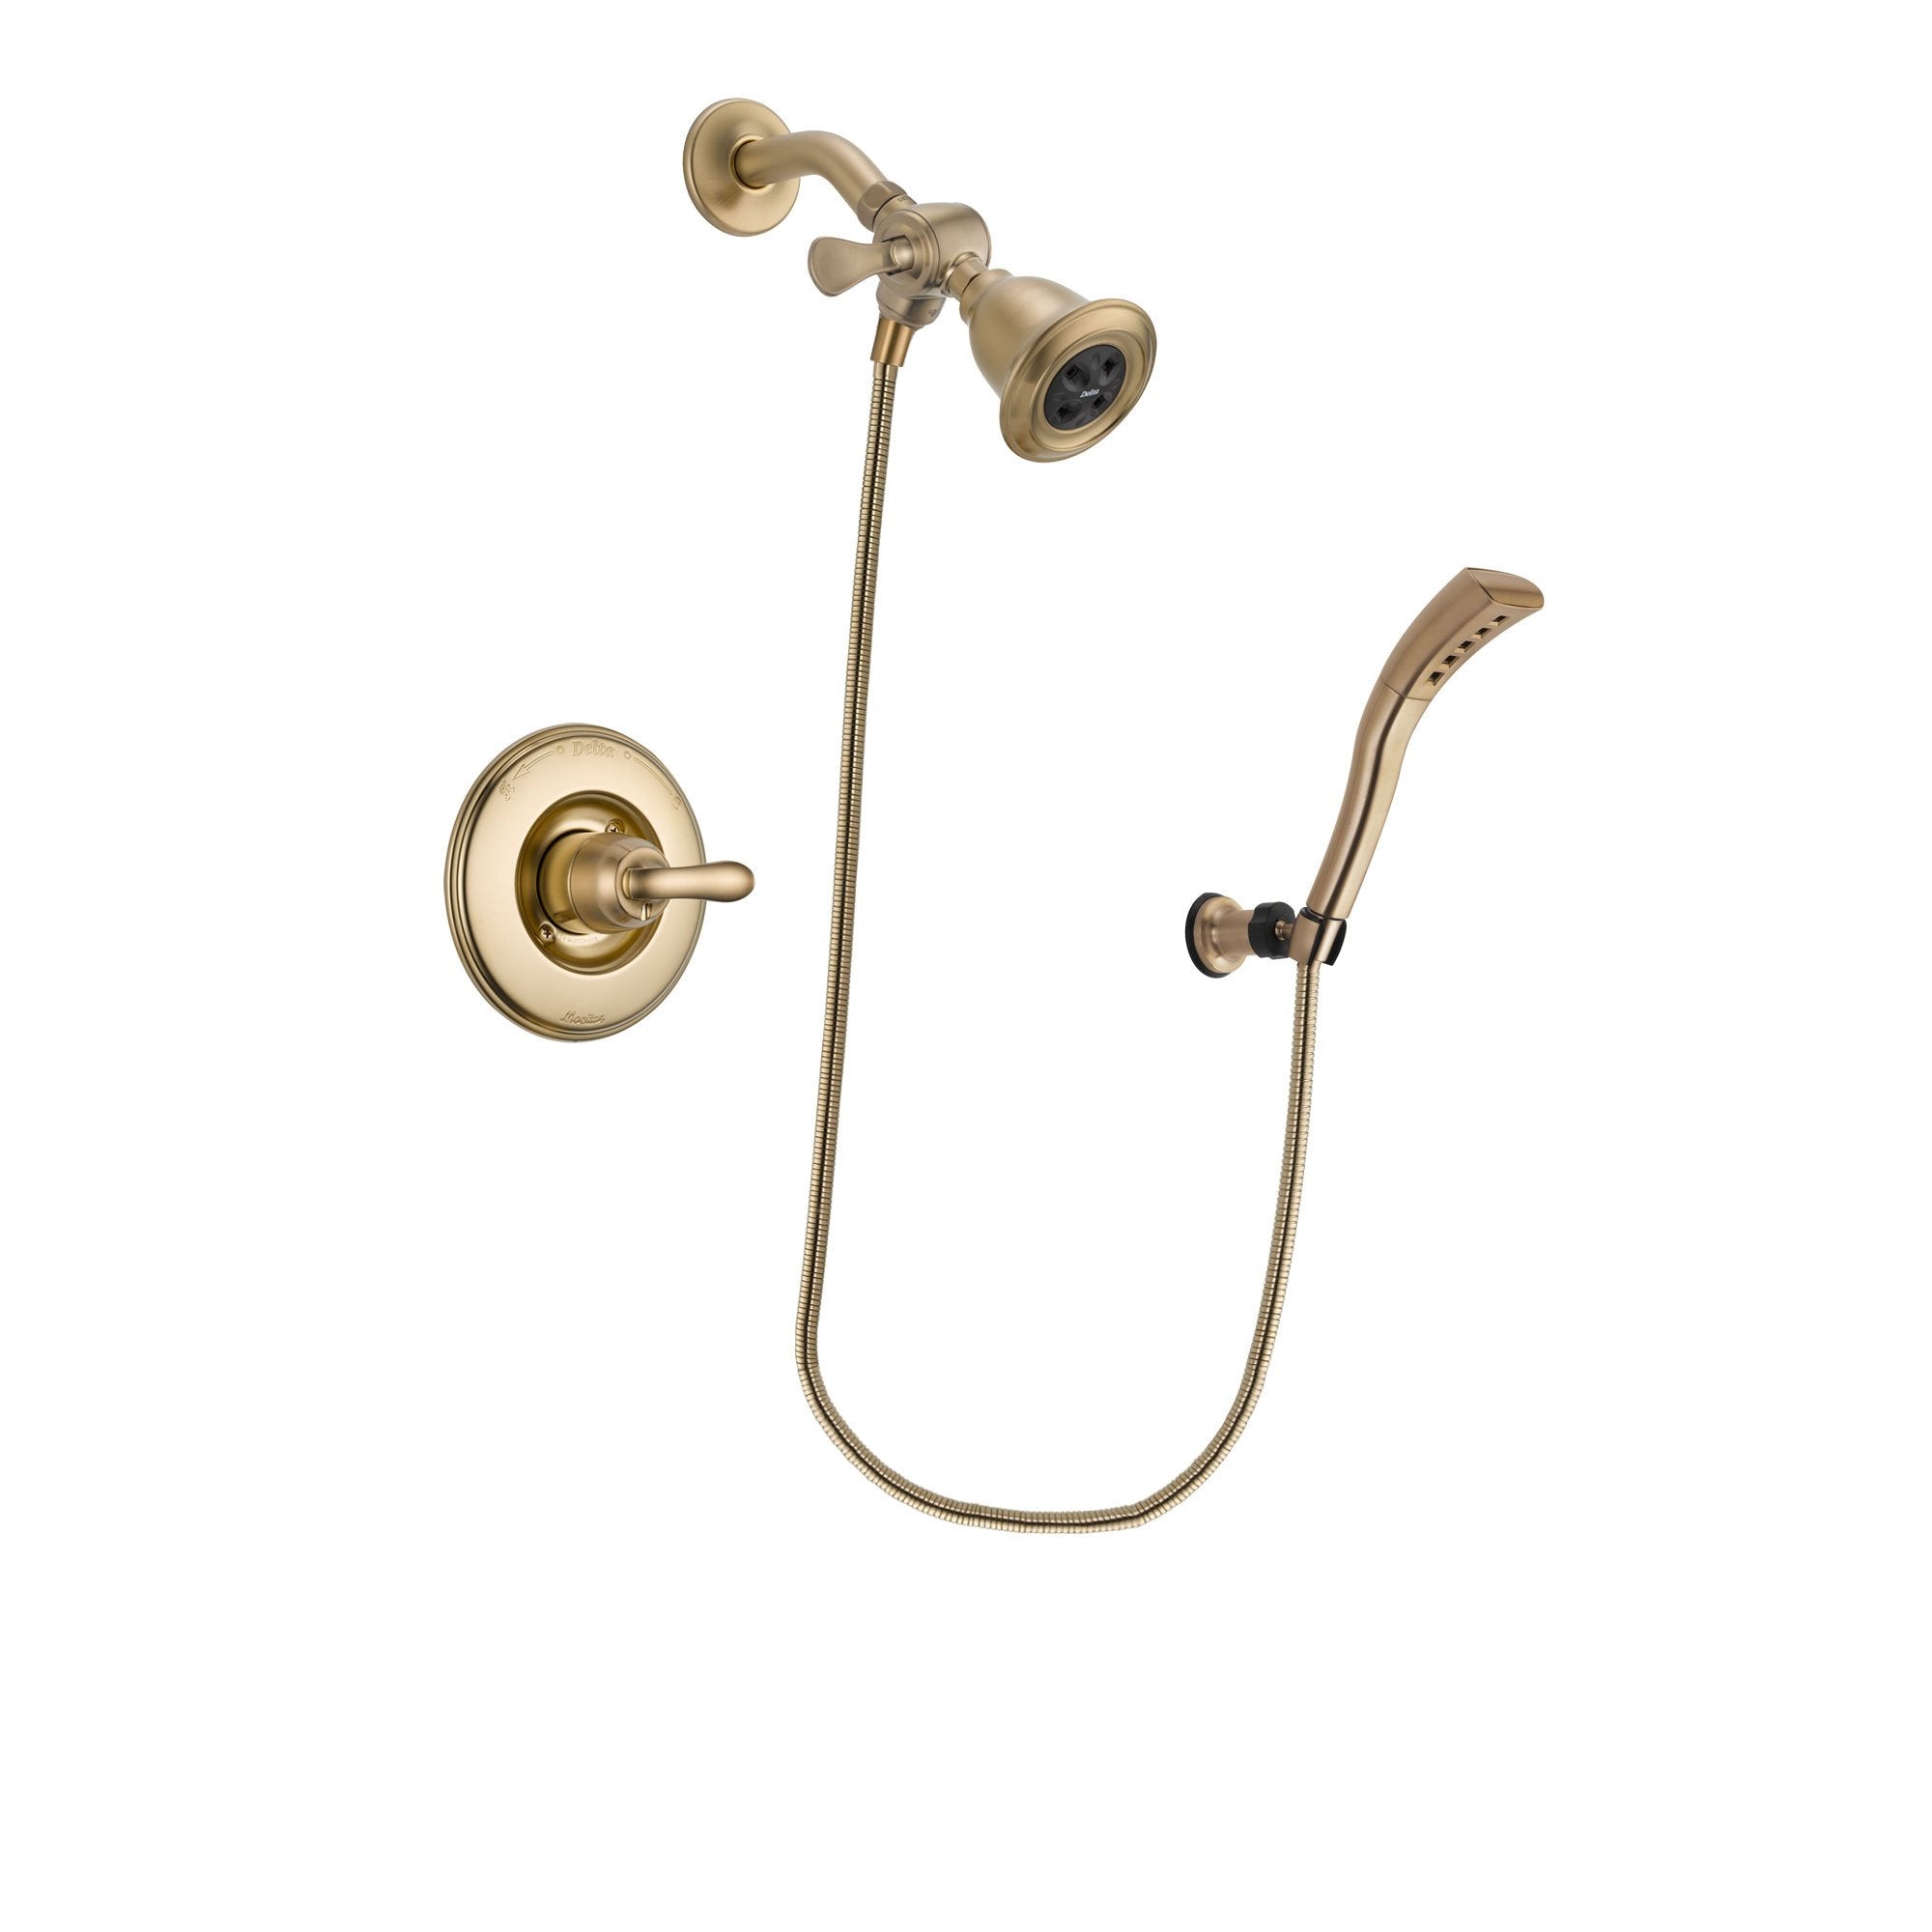 Delta Linden Champagne Bronze Finish Shower Faucet System Package with Water Efficient Showerhead and Modern Wall Mount Personal Handheld Shower Spray Includes Rough-in Valve DSP3670V